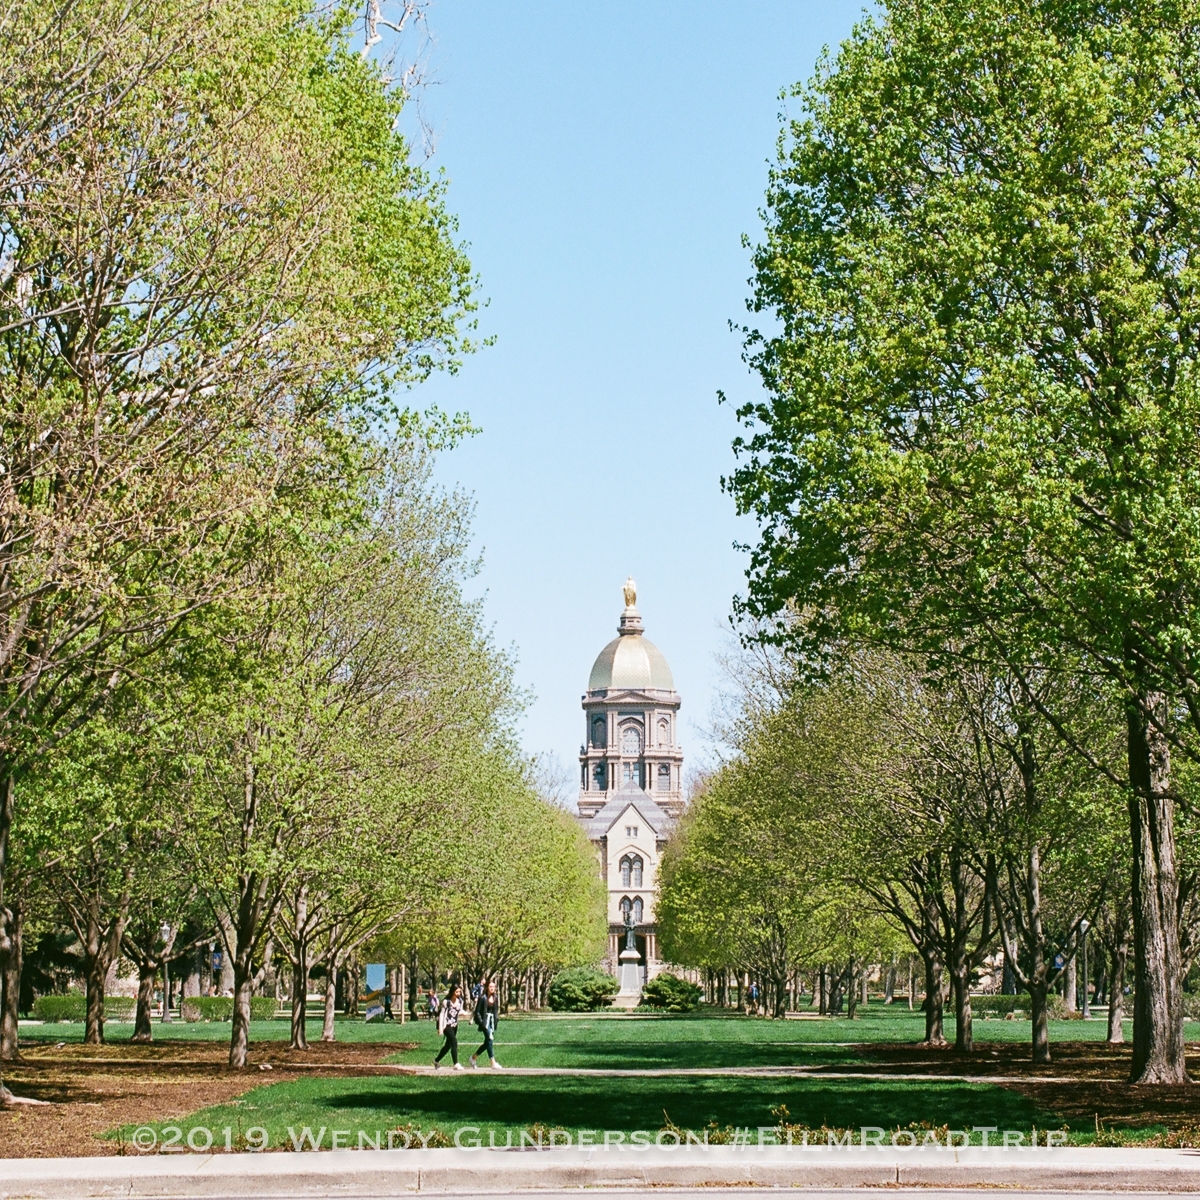 Notre Dame South Bend Indiana